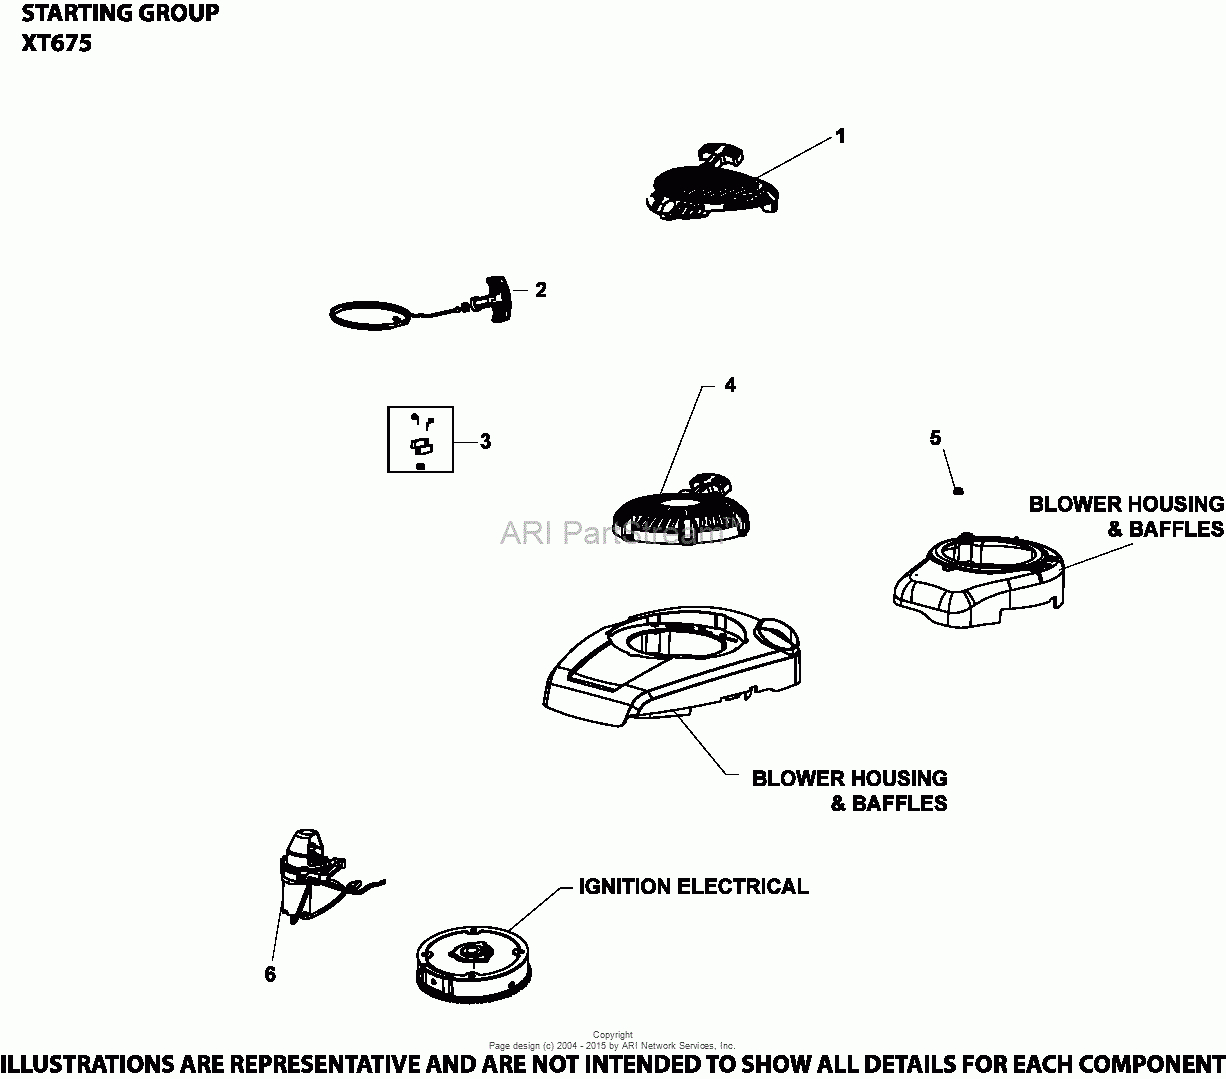 Kohler Engine Charging System Diagram | Wiring Library - Briggs And Stratton Charging System Wiring Diagram